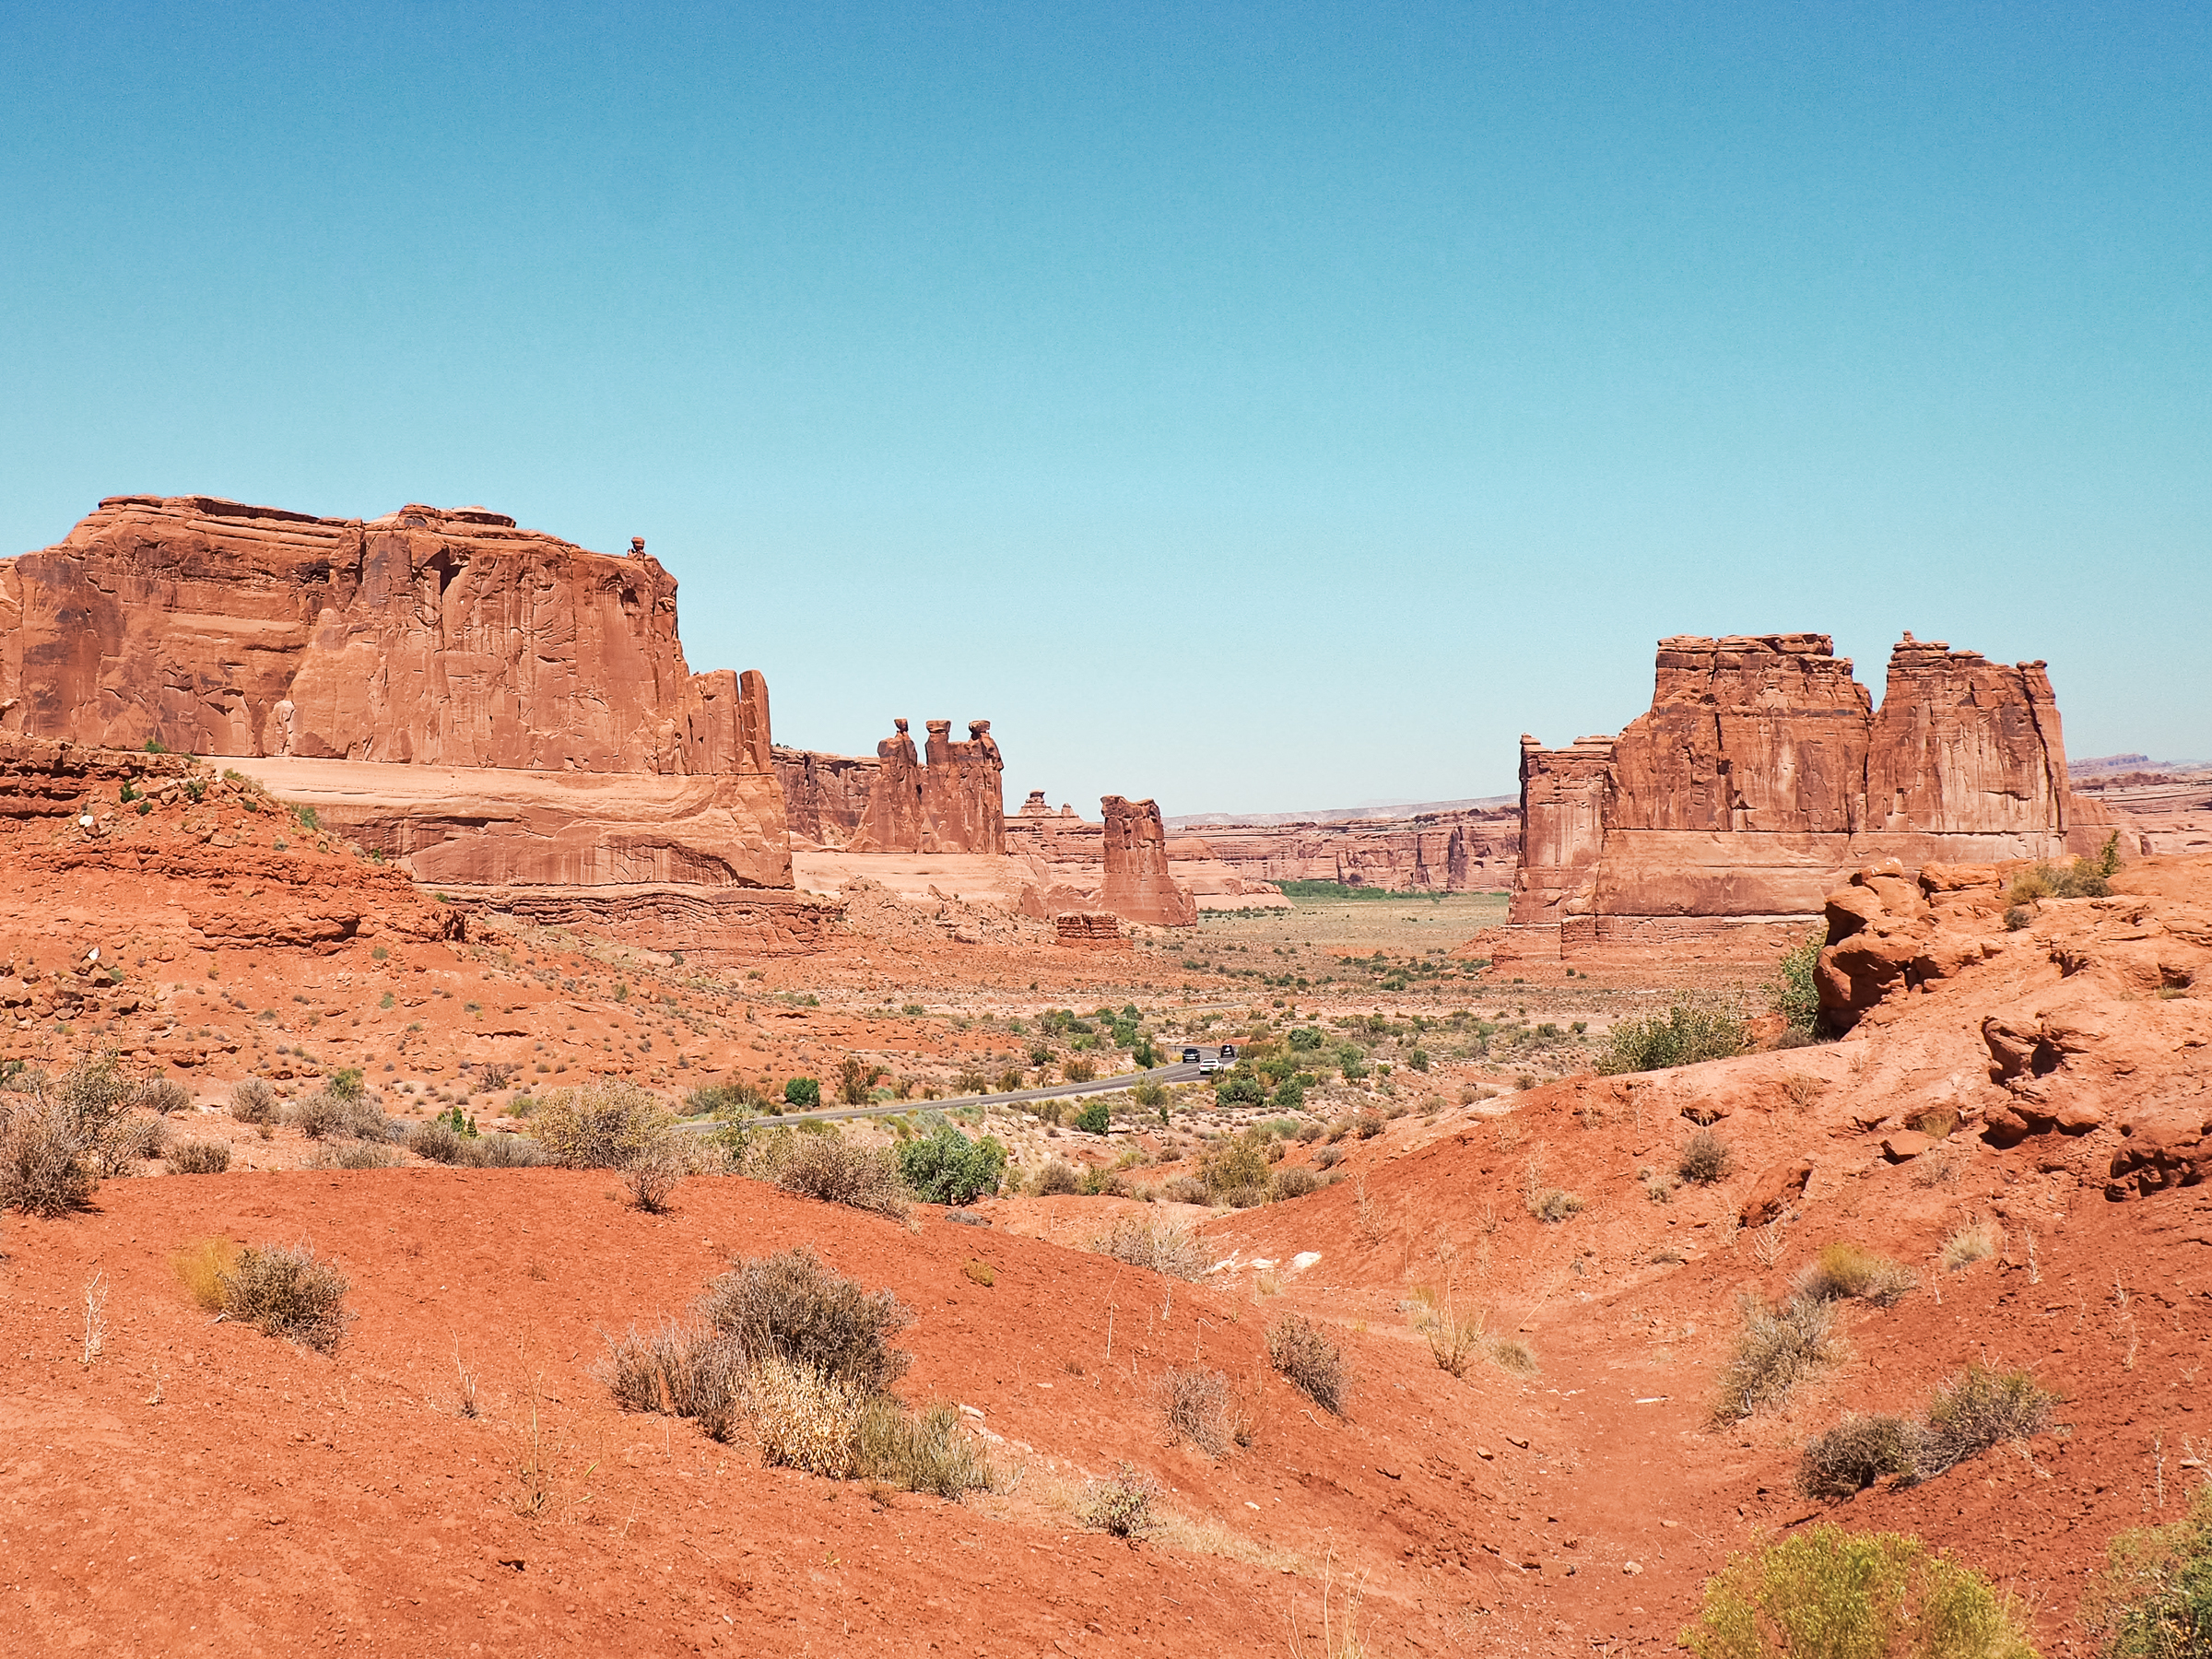 Stunning views of sandstone formations while driving through Arches National Park